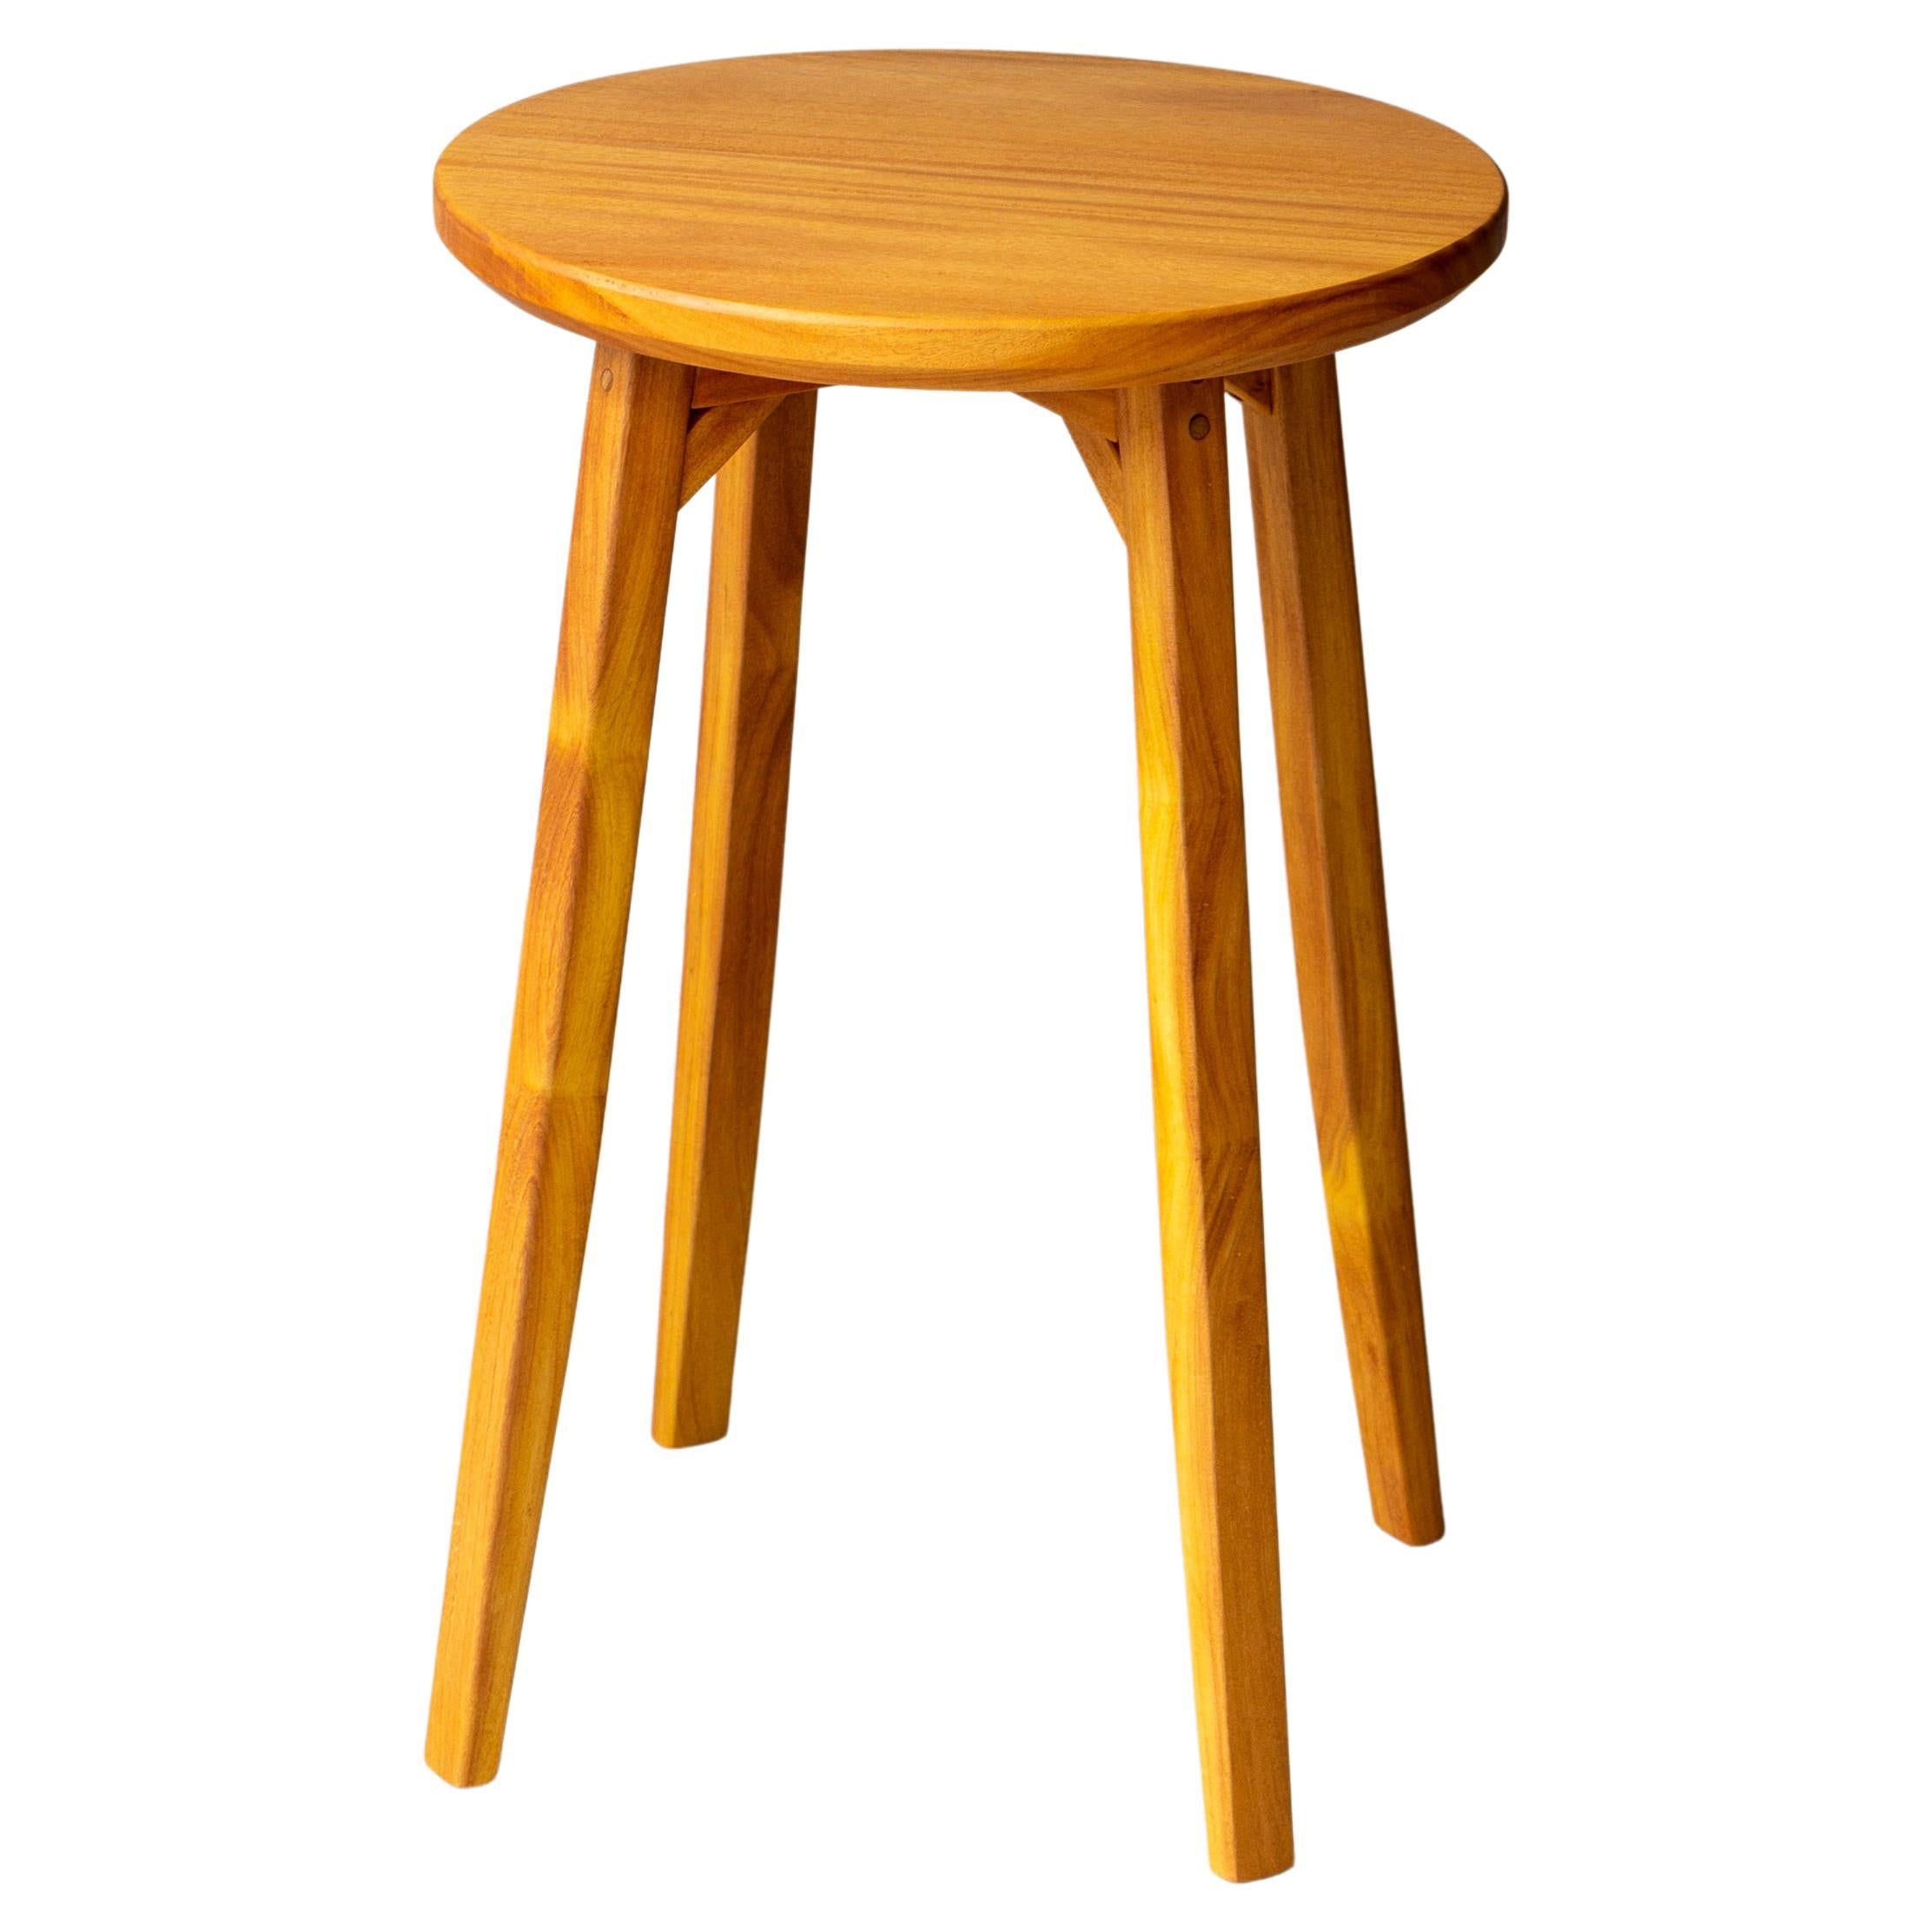 'Oriente' Side Table in Brazilian Hardwood - by André Bianco For Sale